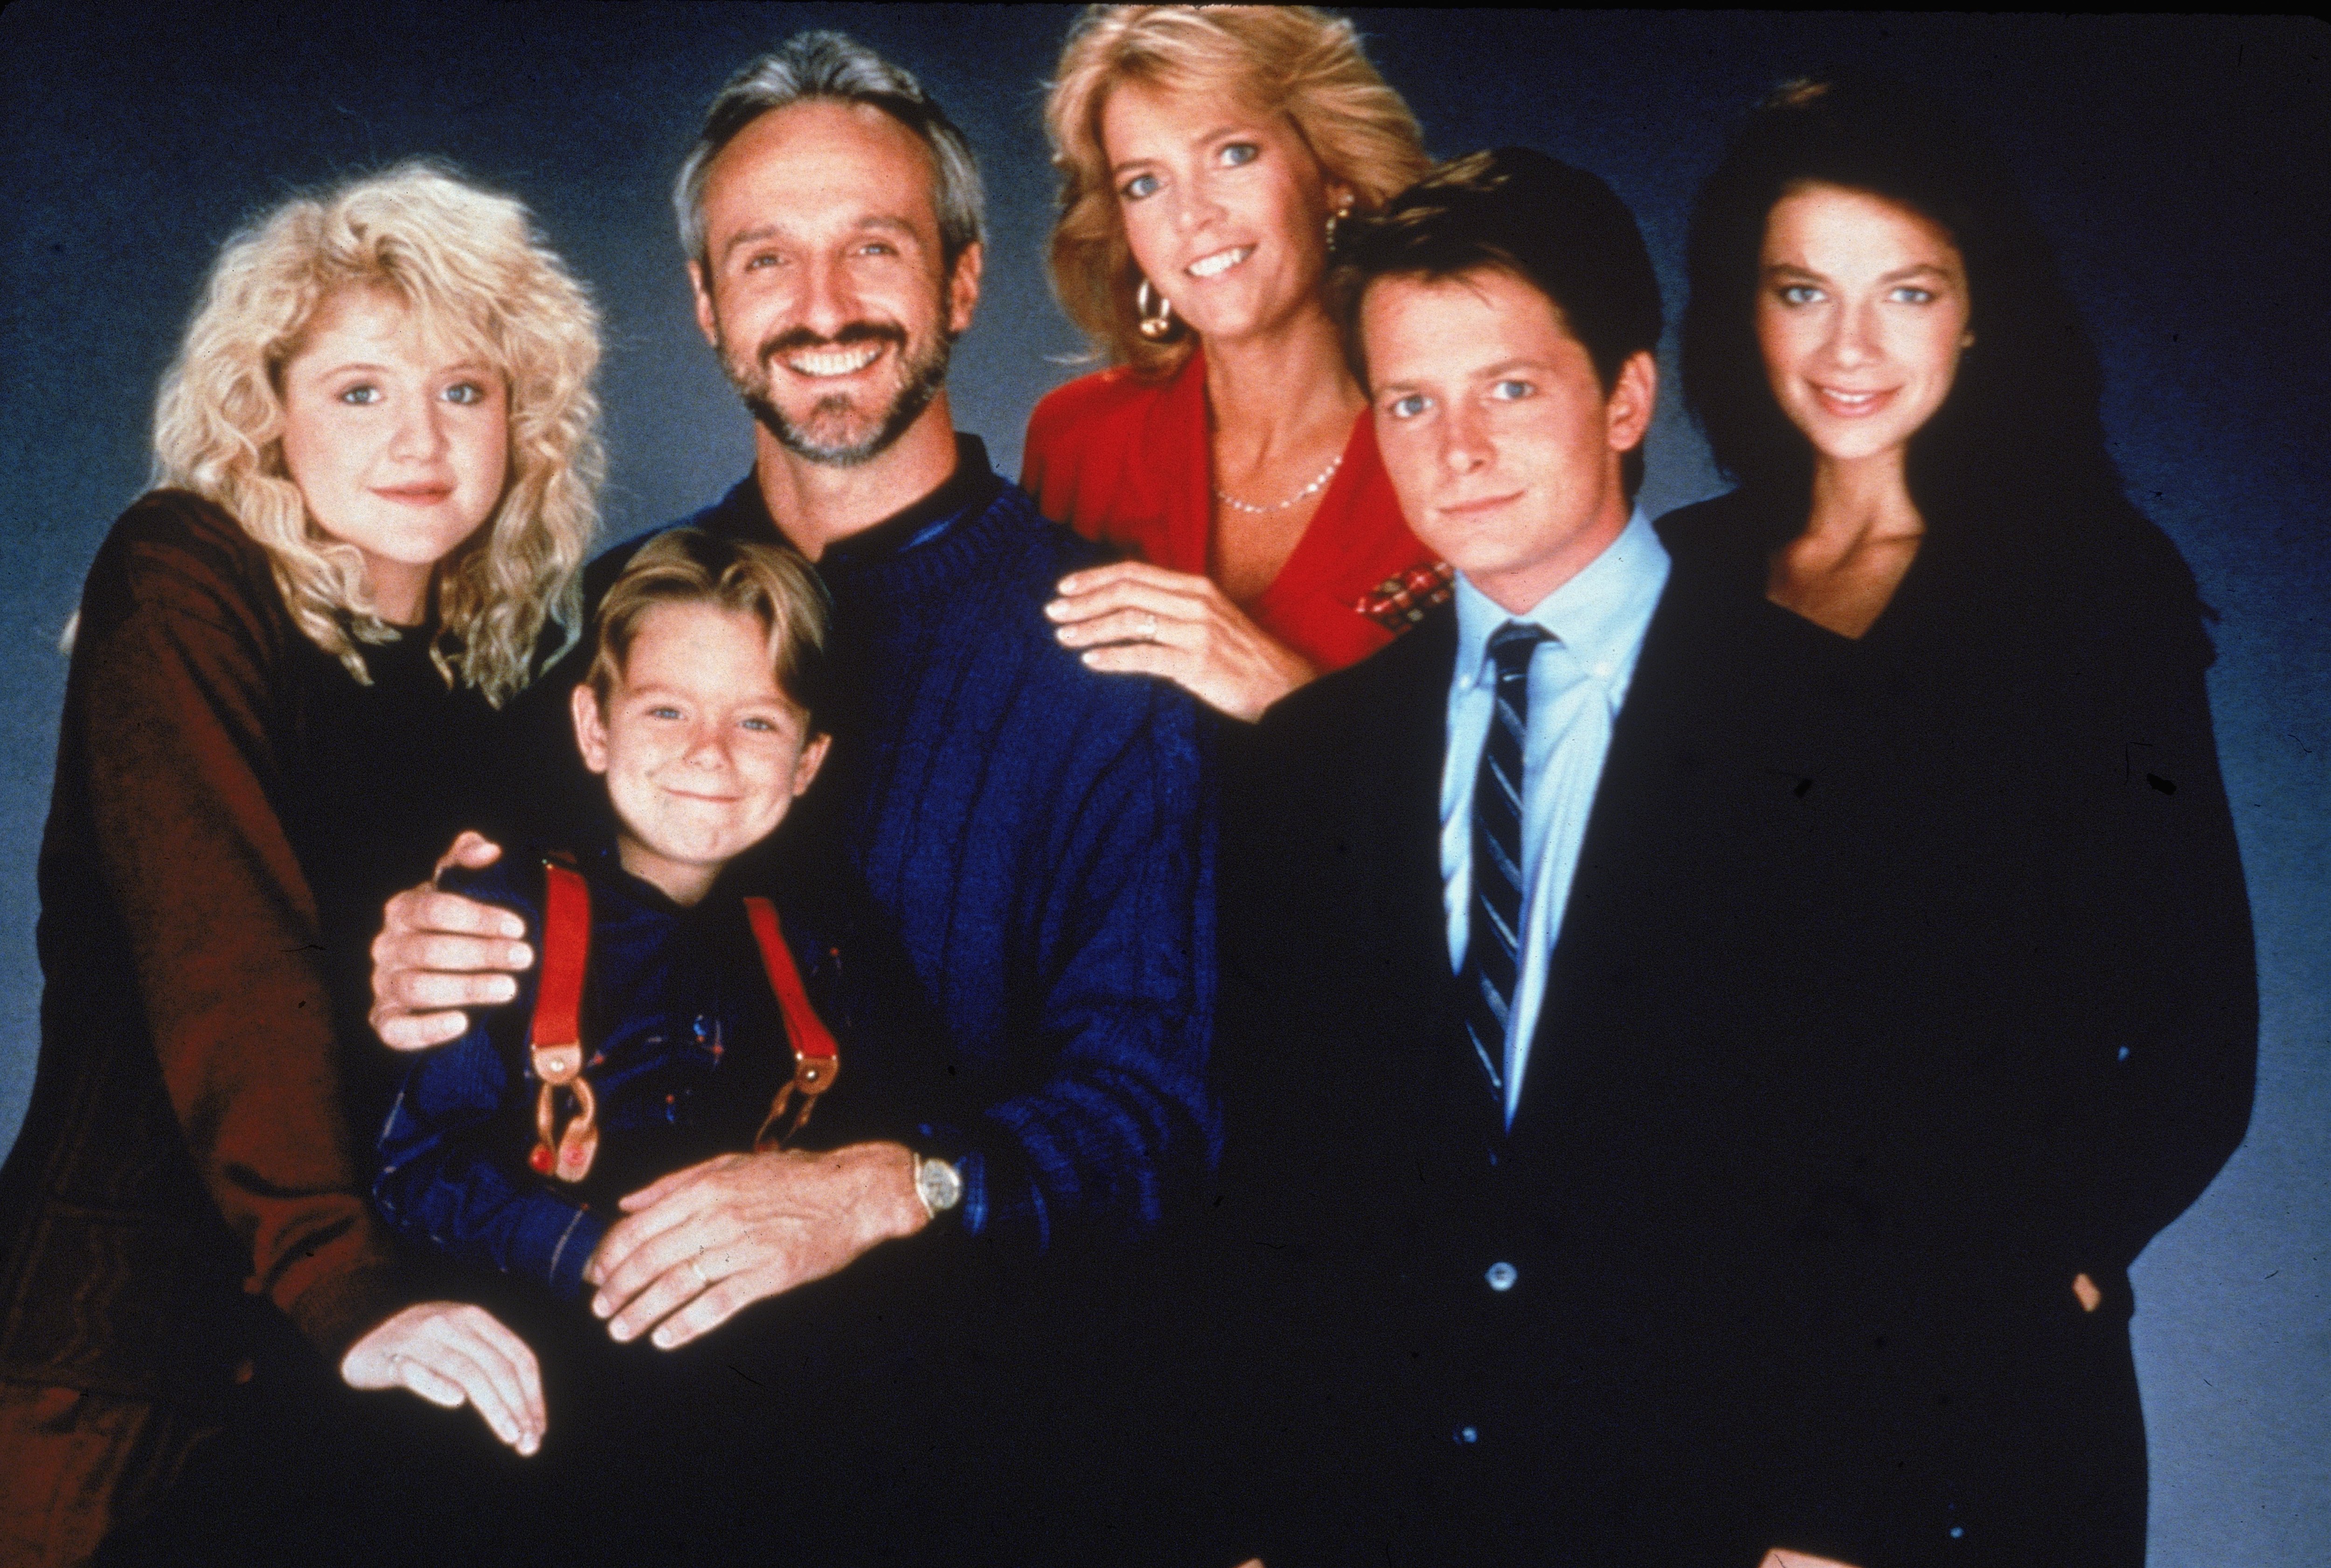 Tina Yothers, Brian Bonsall, Michael Gross, Meredith Baxter Birney, Michael J. Fox, and Justine Bateman in a promotional portrait for "Family Ties," circa 1989 | Source: Getty Images